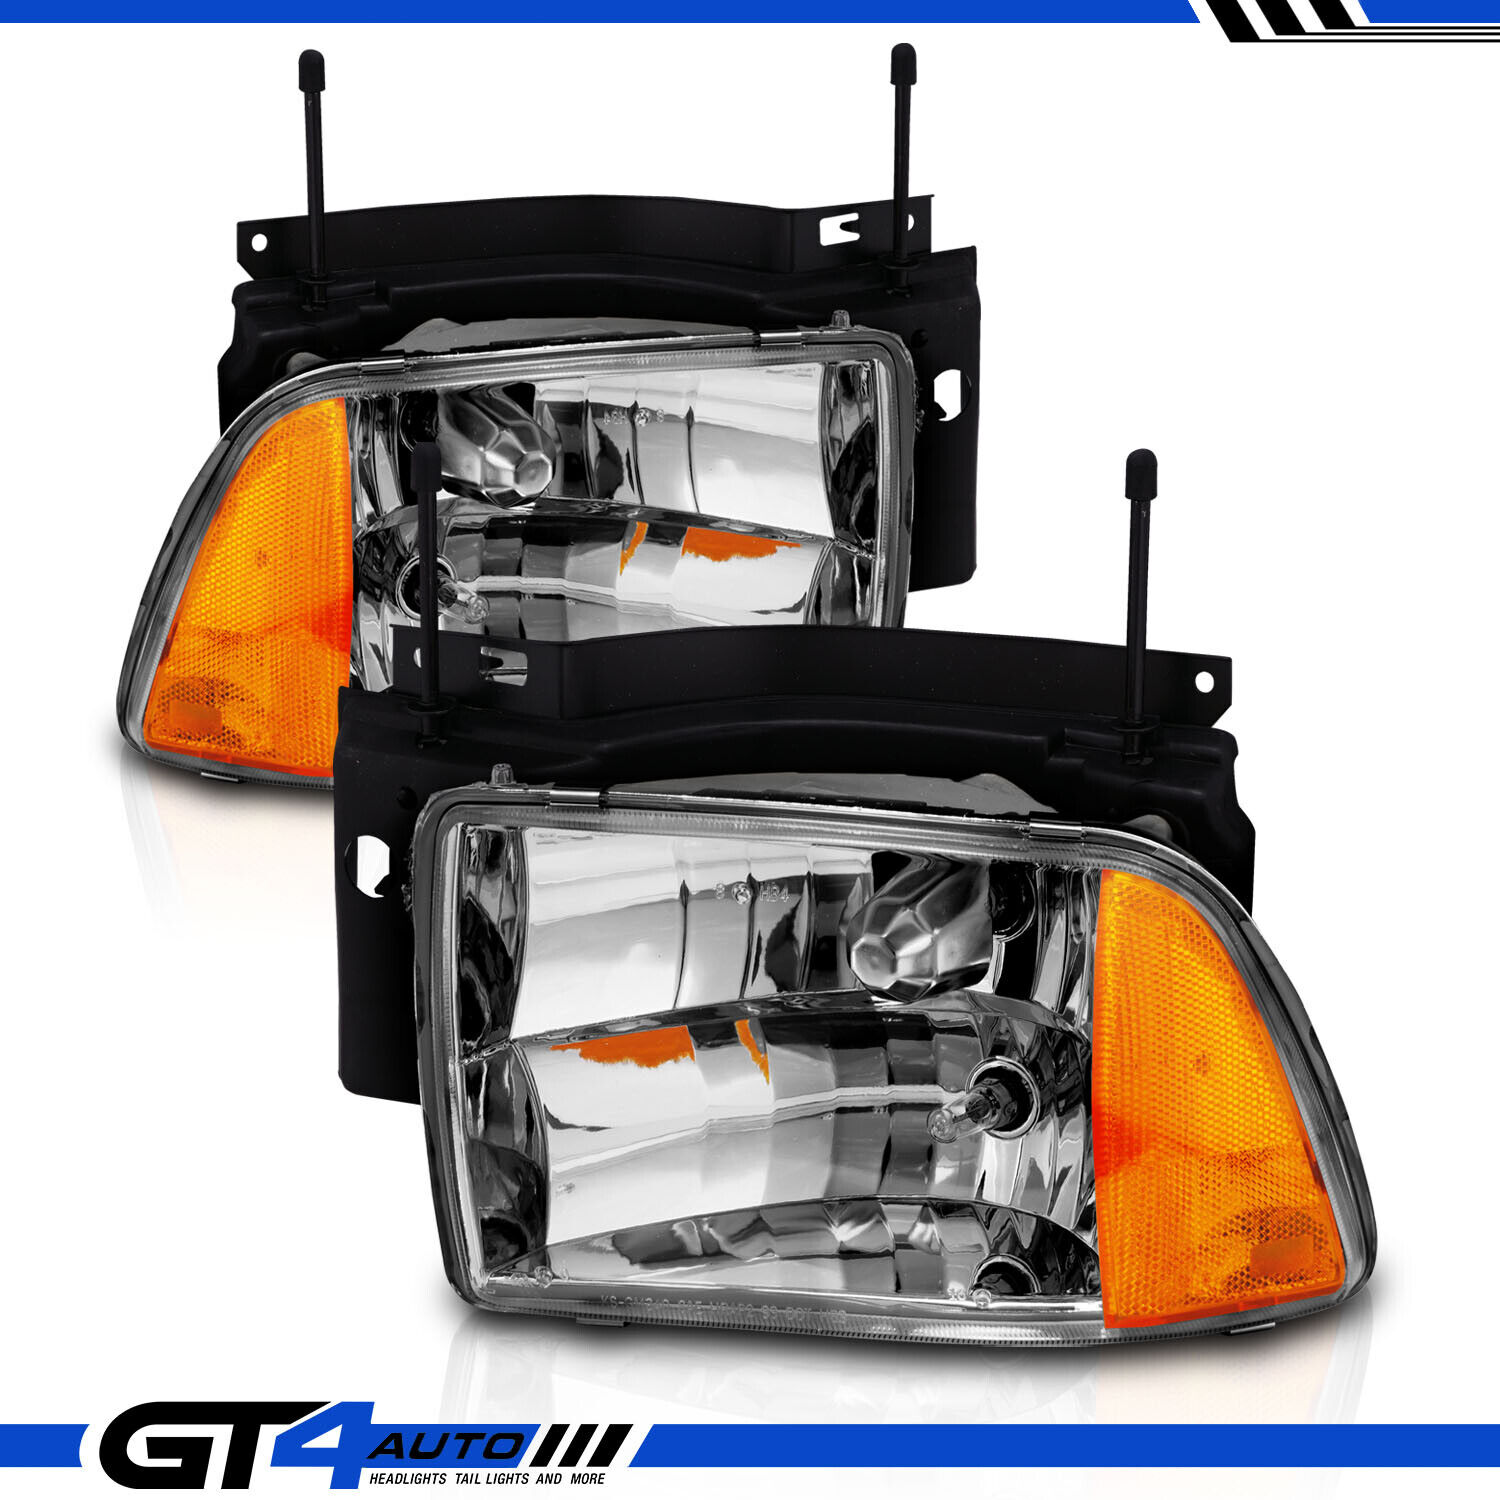 Euro Crystal Clear Composite Type Headlights Pair for 1995-1997 Chevrolet Blazer